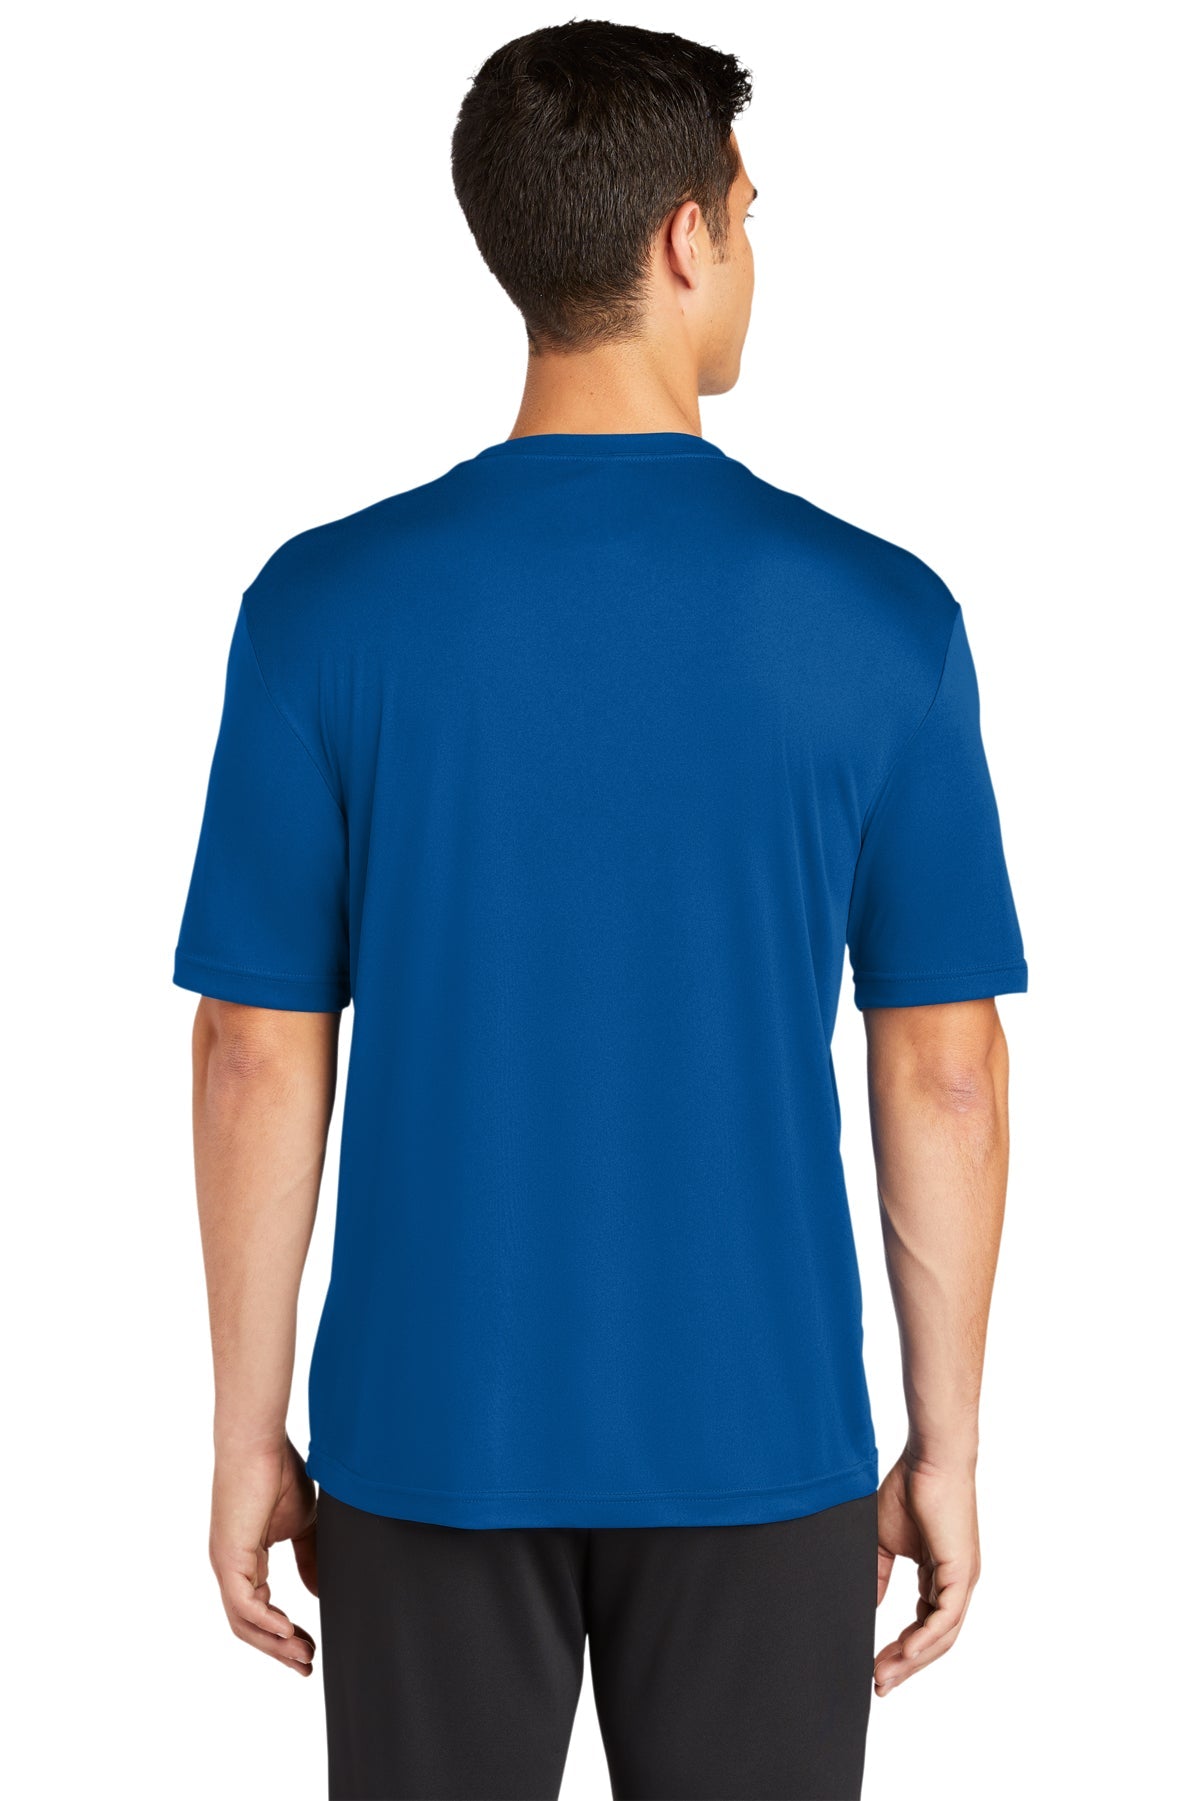 Sport-Tek Tall PosiCharge Branded Competitor Tee's, True Royal